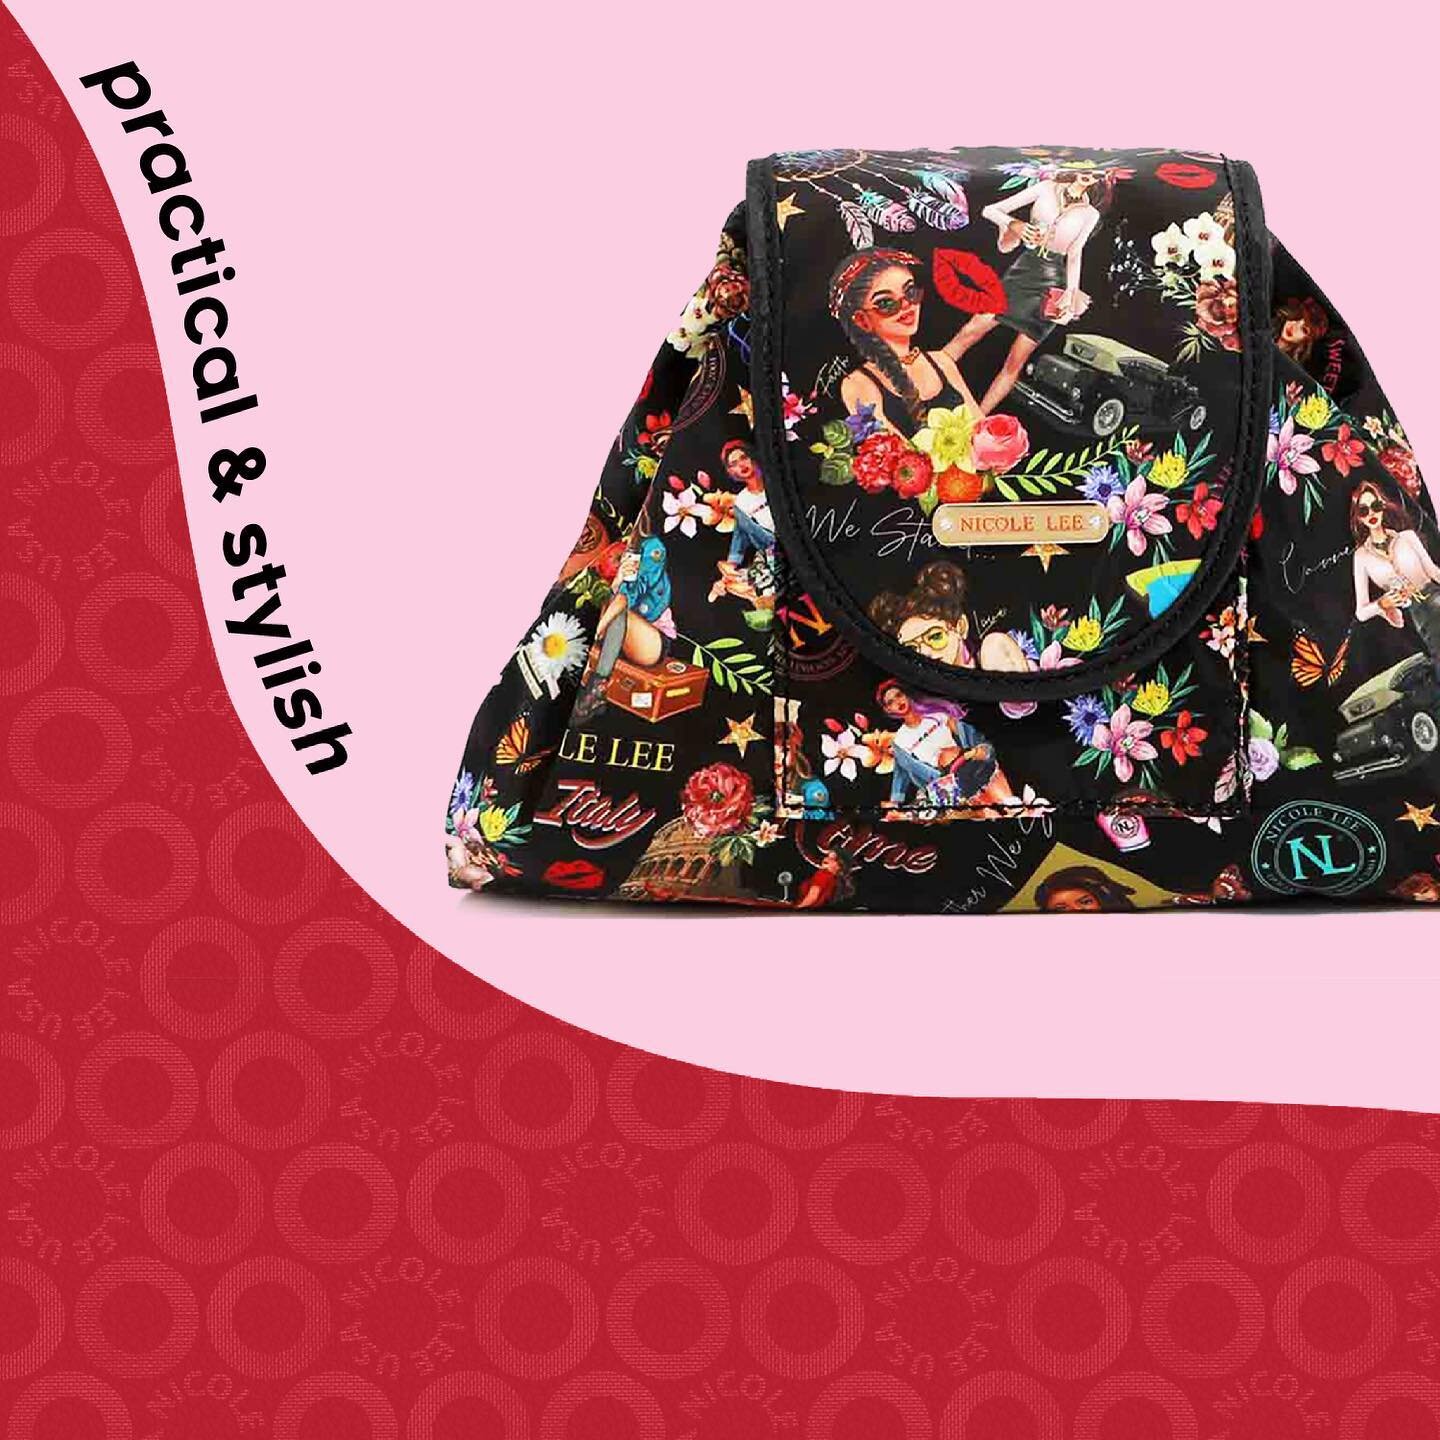 ✨NEW IN! DRAWSTRING COSMETIC BAG✨Store all your makeup in this lightweight and portable cosmetic bag that easily expands and closes thanks to a convenient drawstring closure!👛💄🥰 Tap the photos to see prices or visit the link in our bio to visit ou